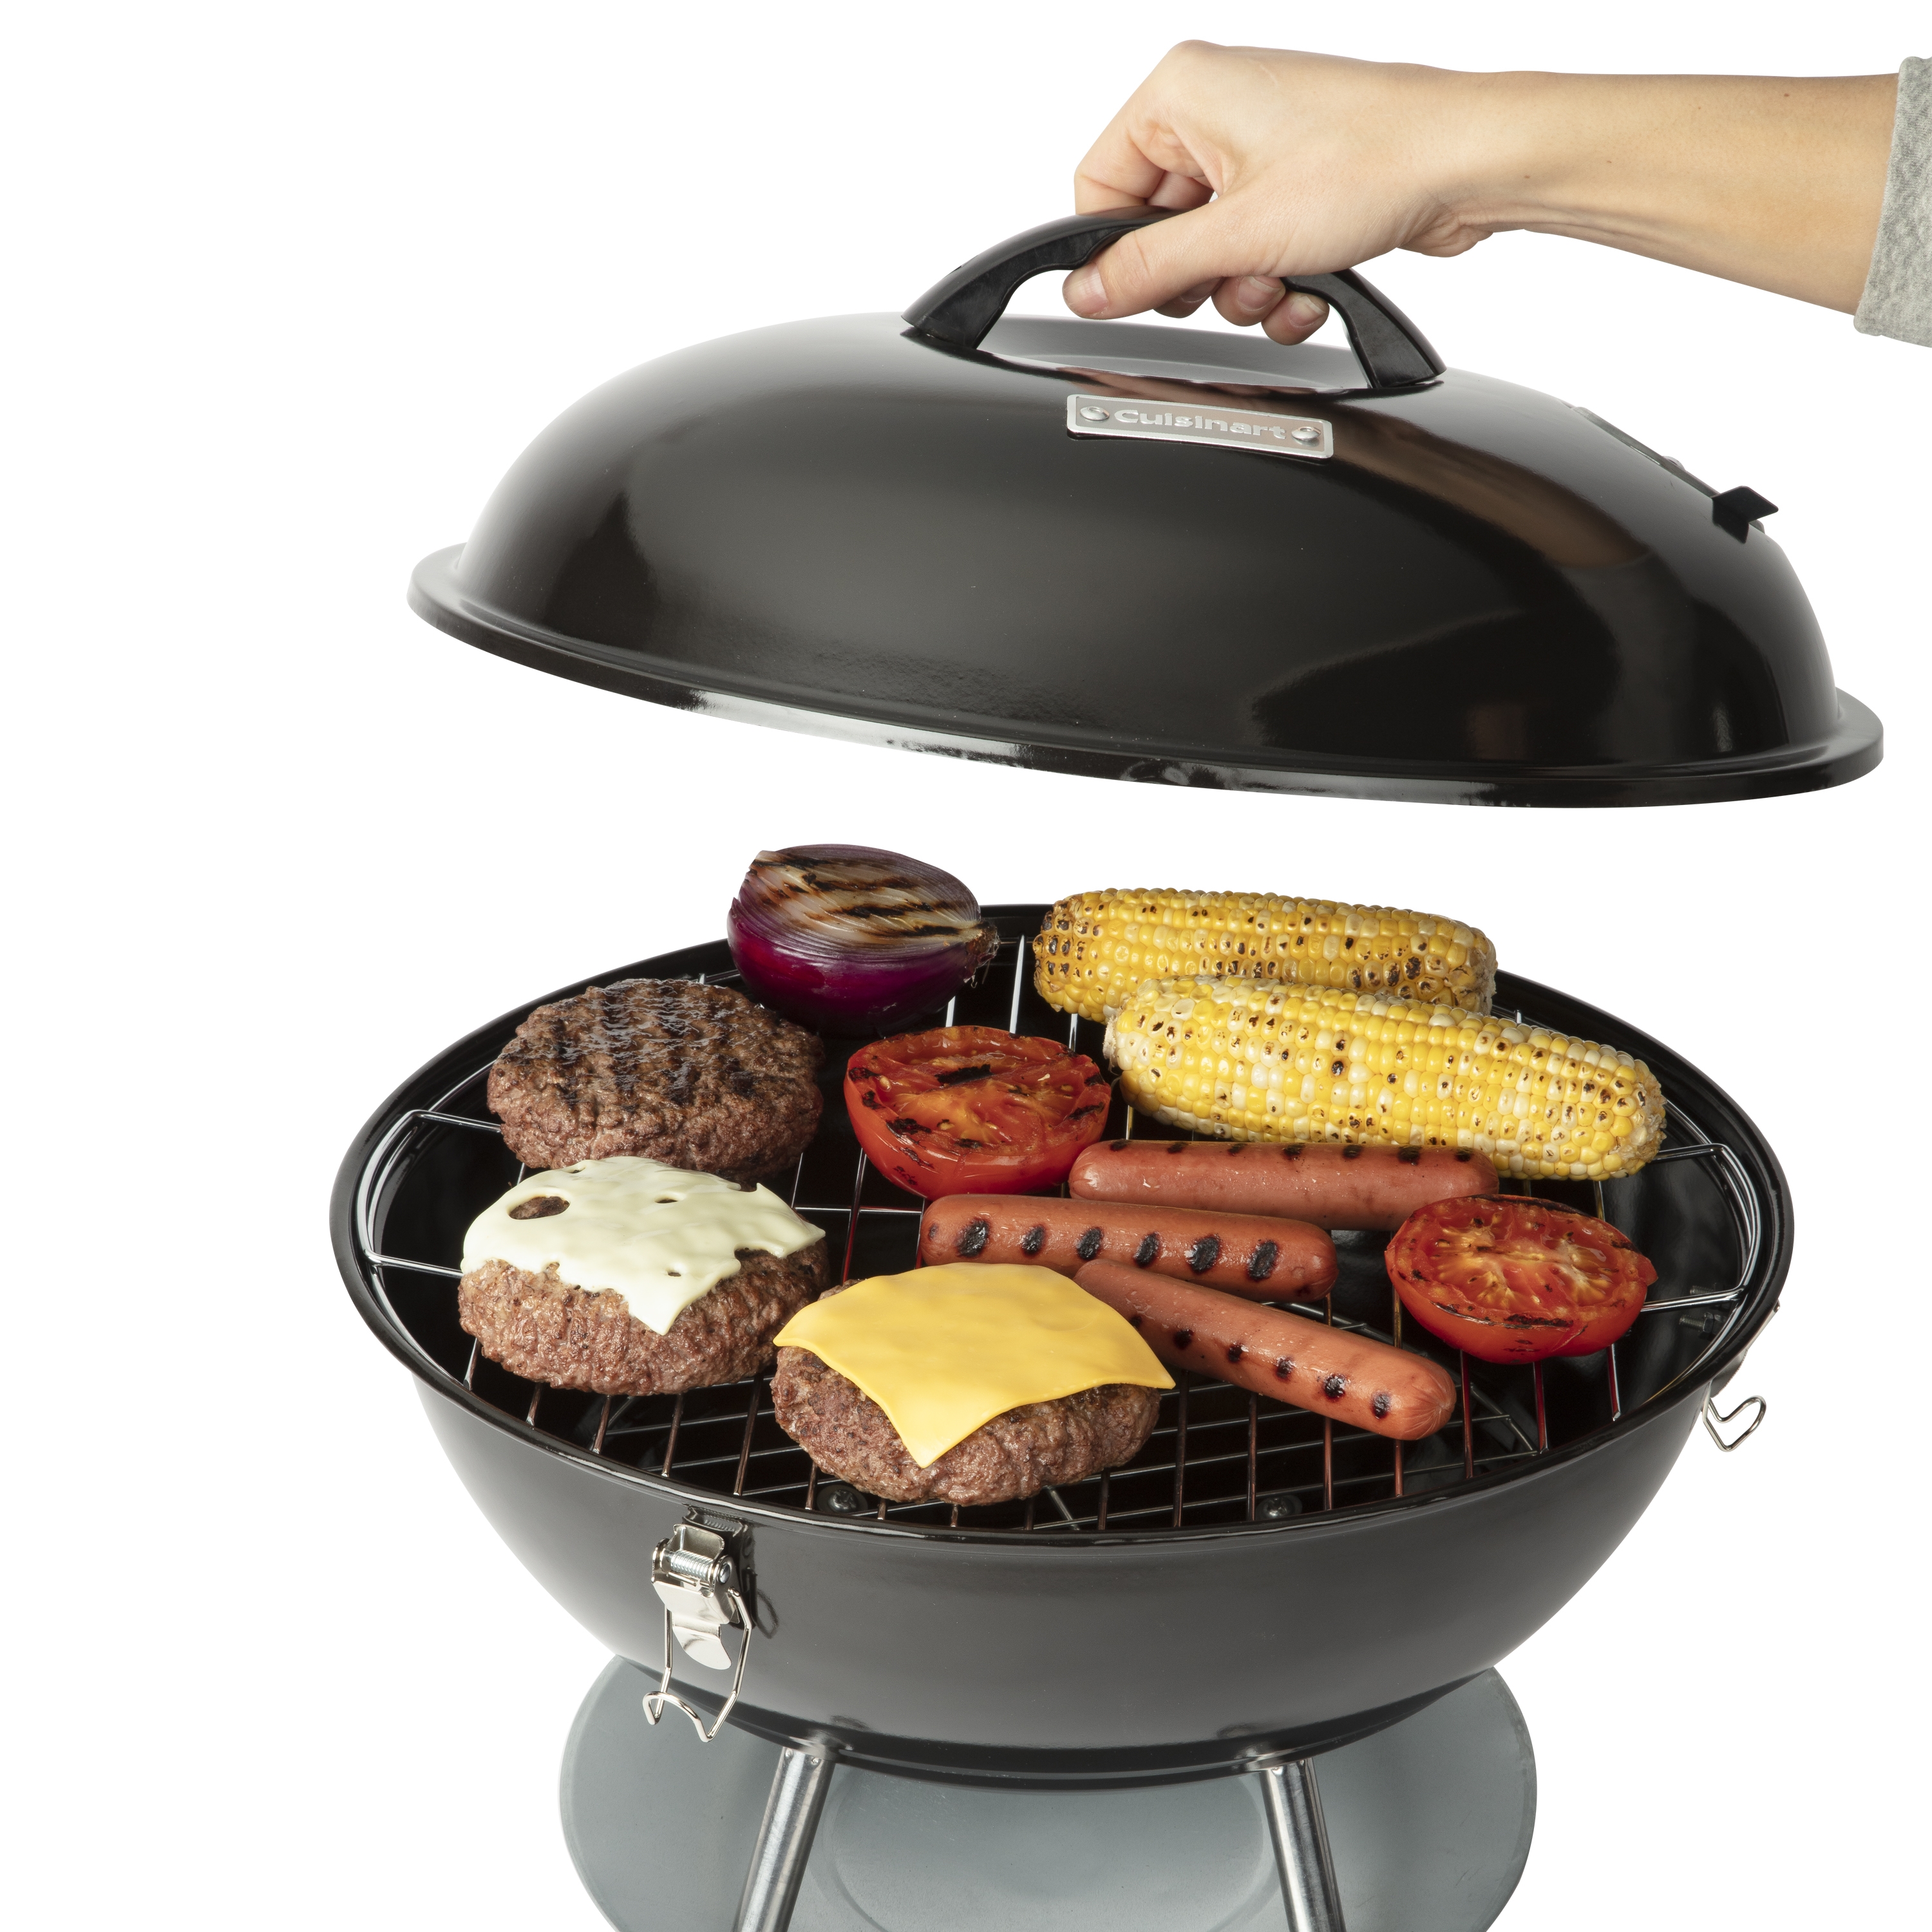 Professional contact-grills : Extra-large cast-iron contact-grill